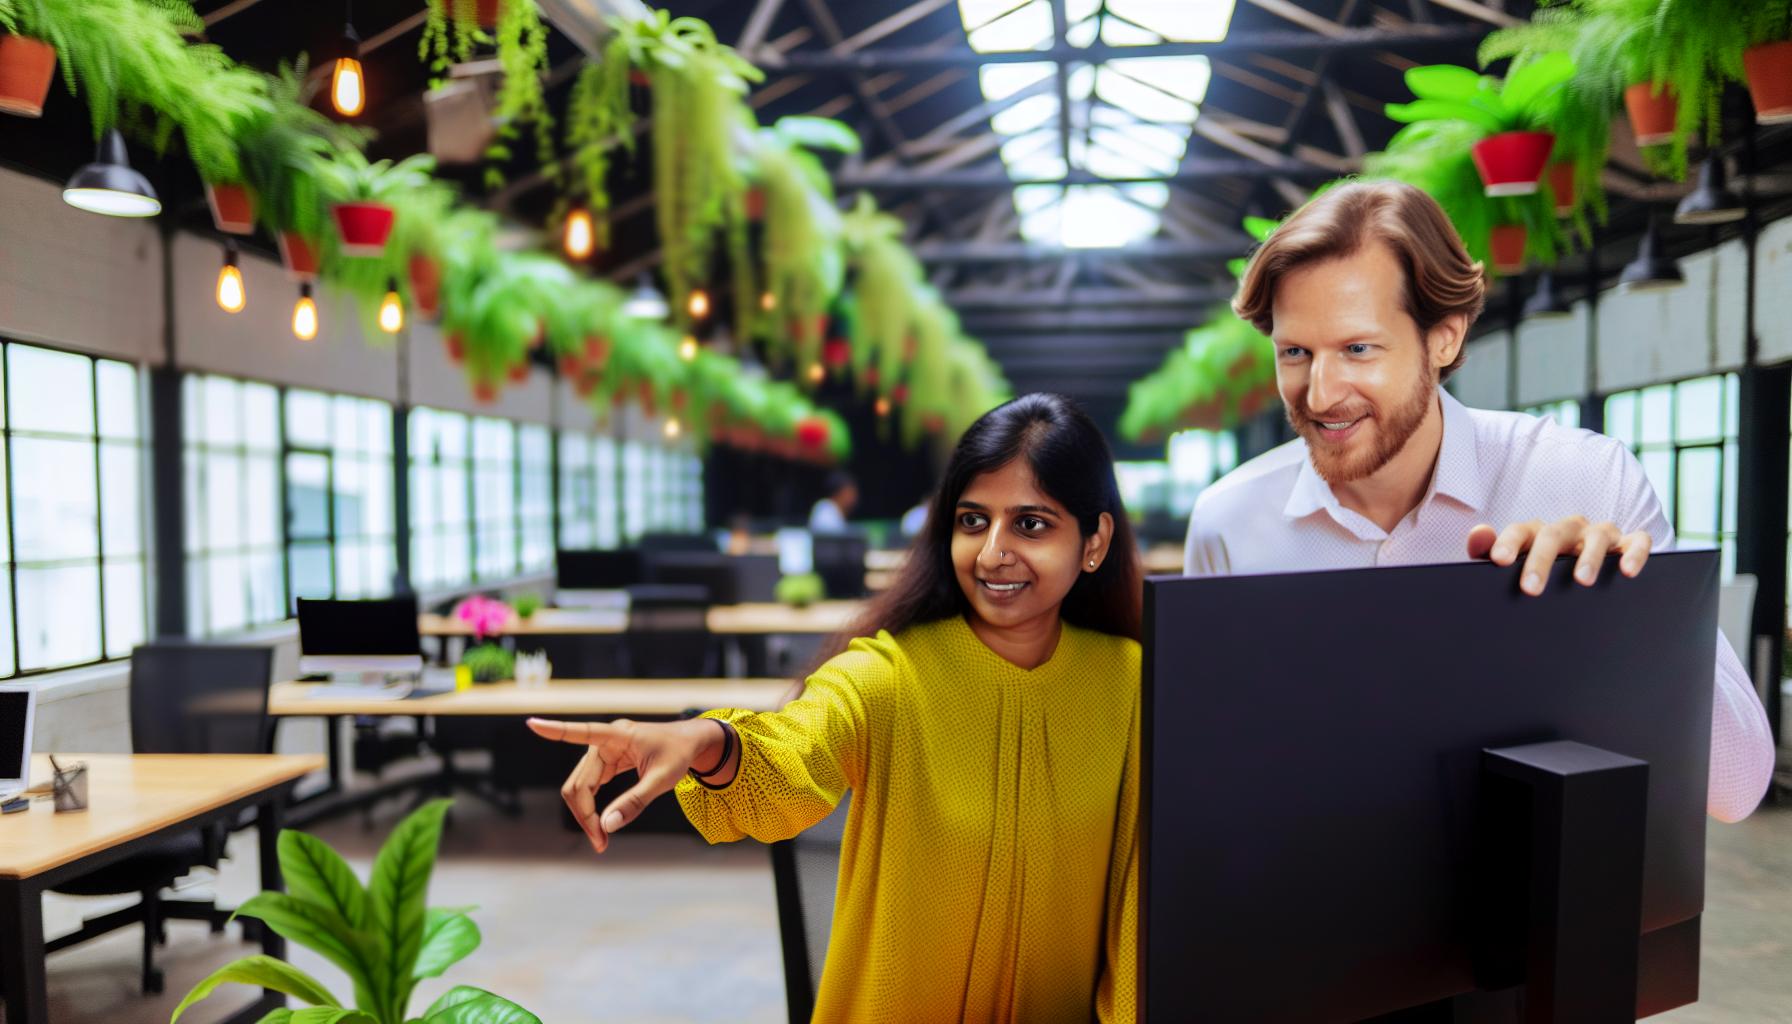 A woman and a man point at a screen in an openplan office surrounded by plants